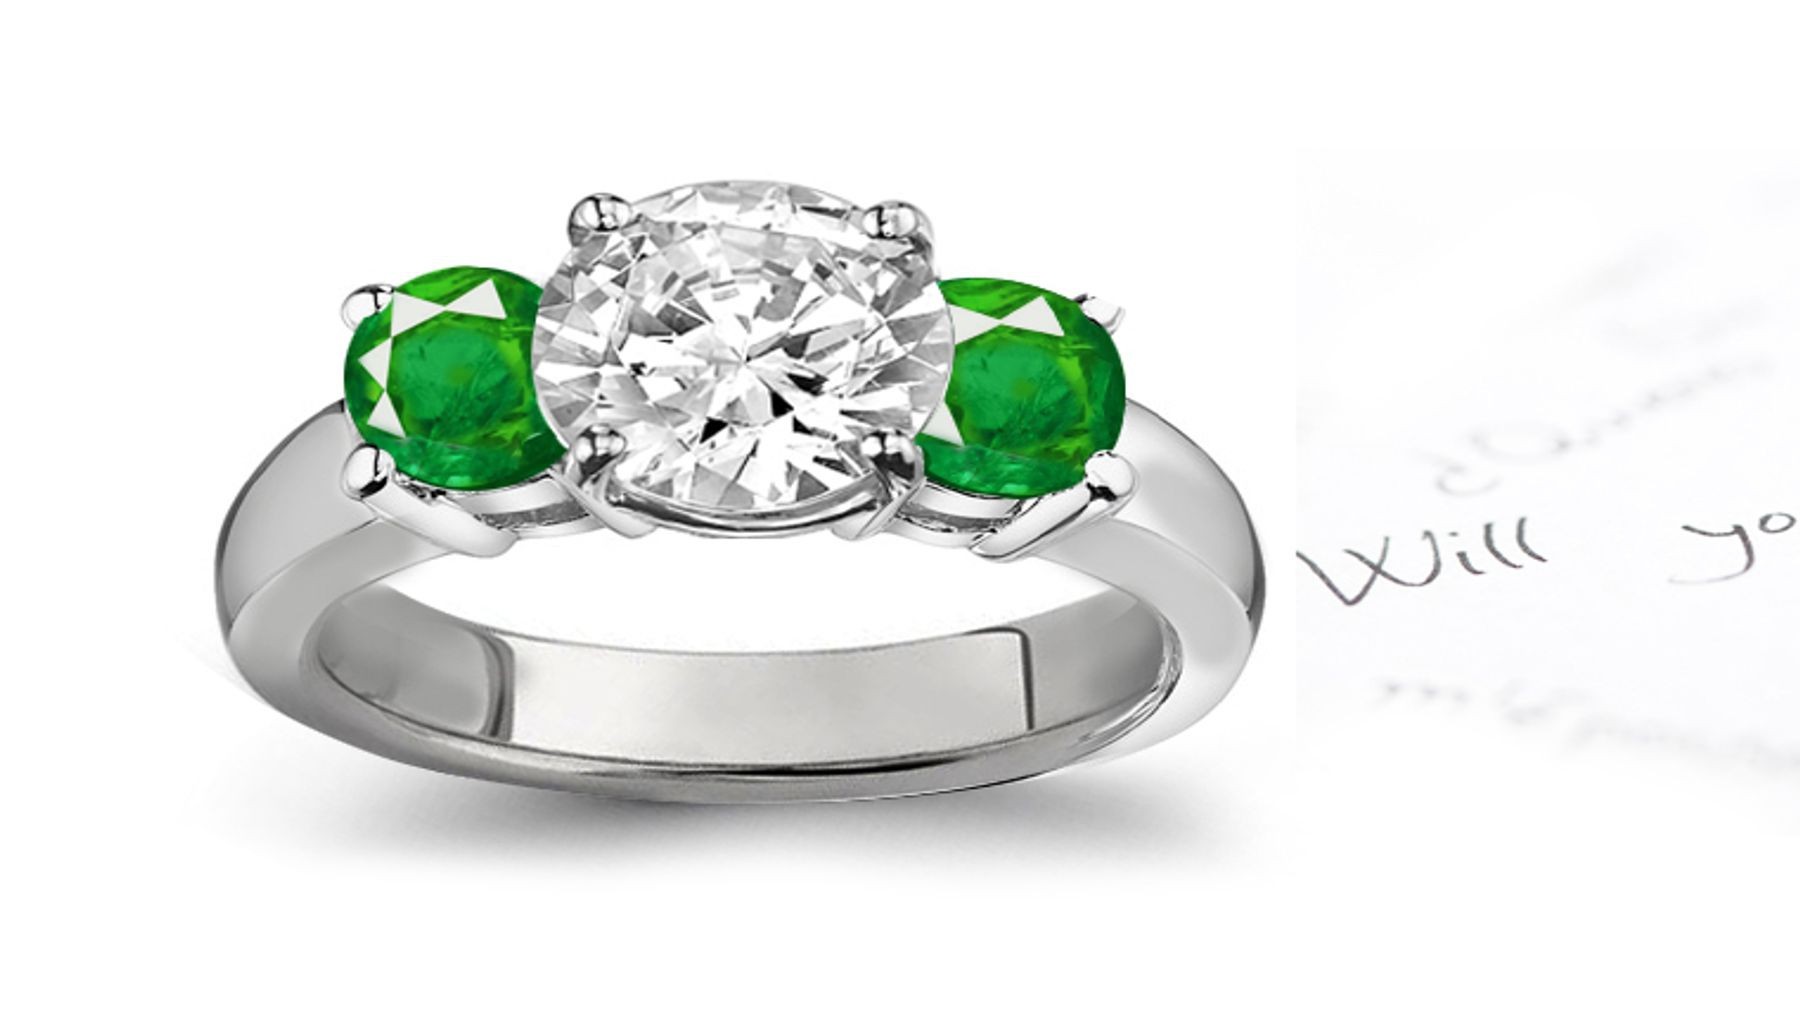 Dreams & Reality: View Fine-Quality Emerald Diamond Designer Engagement Rings